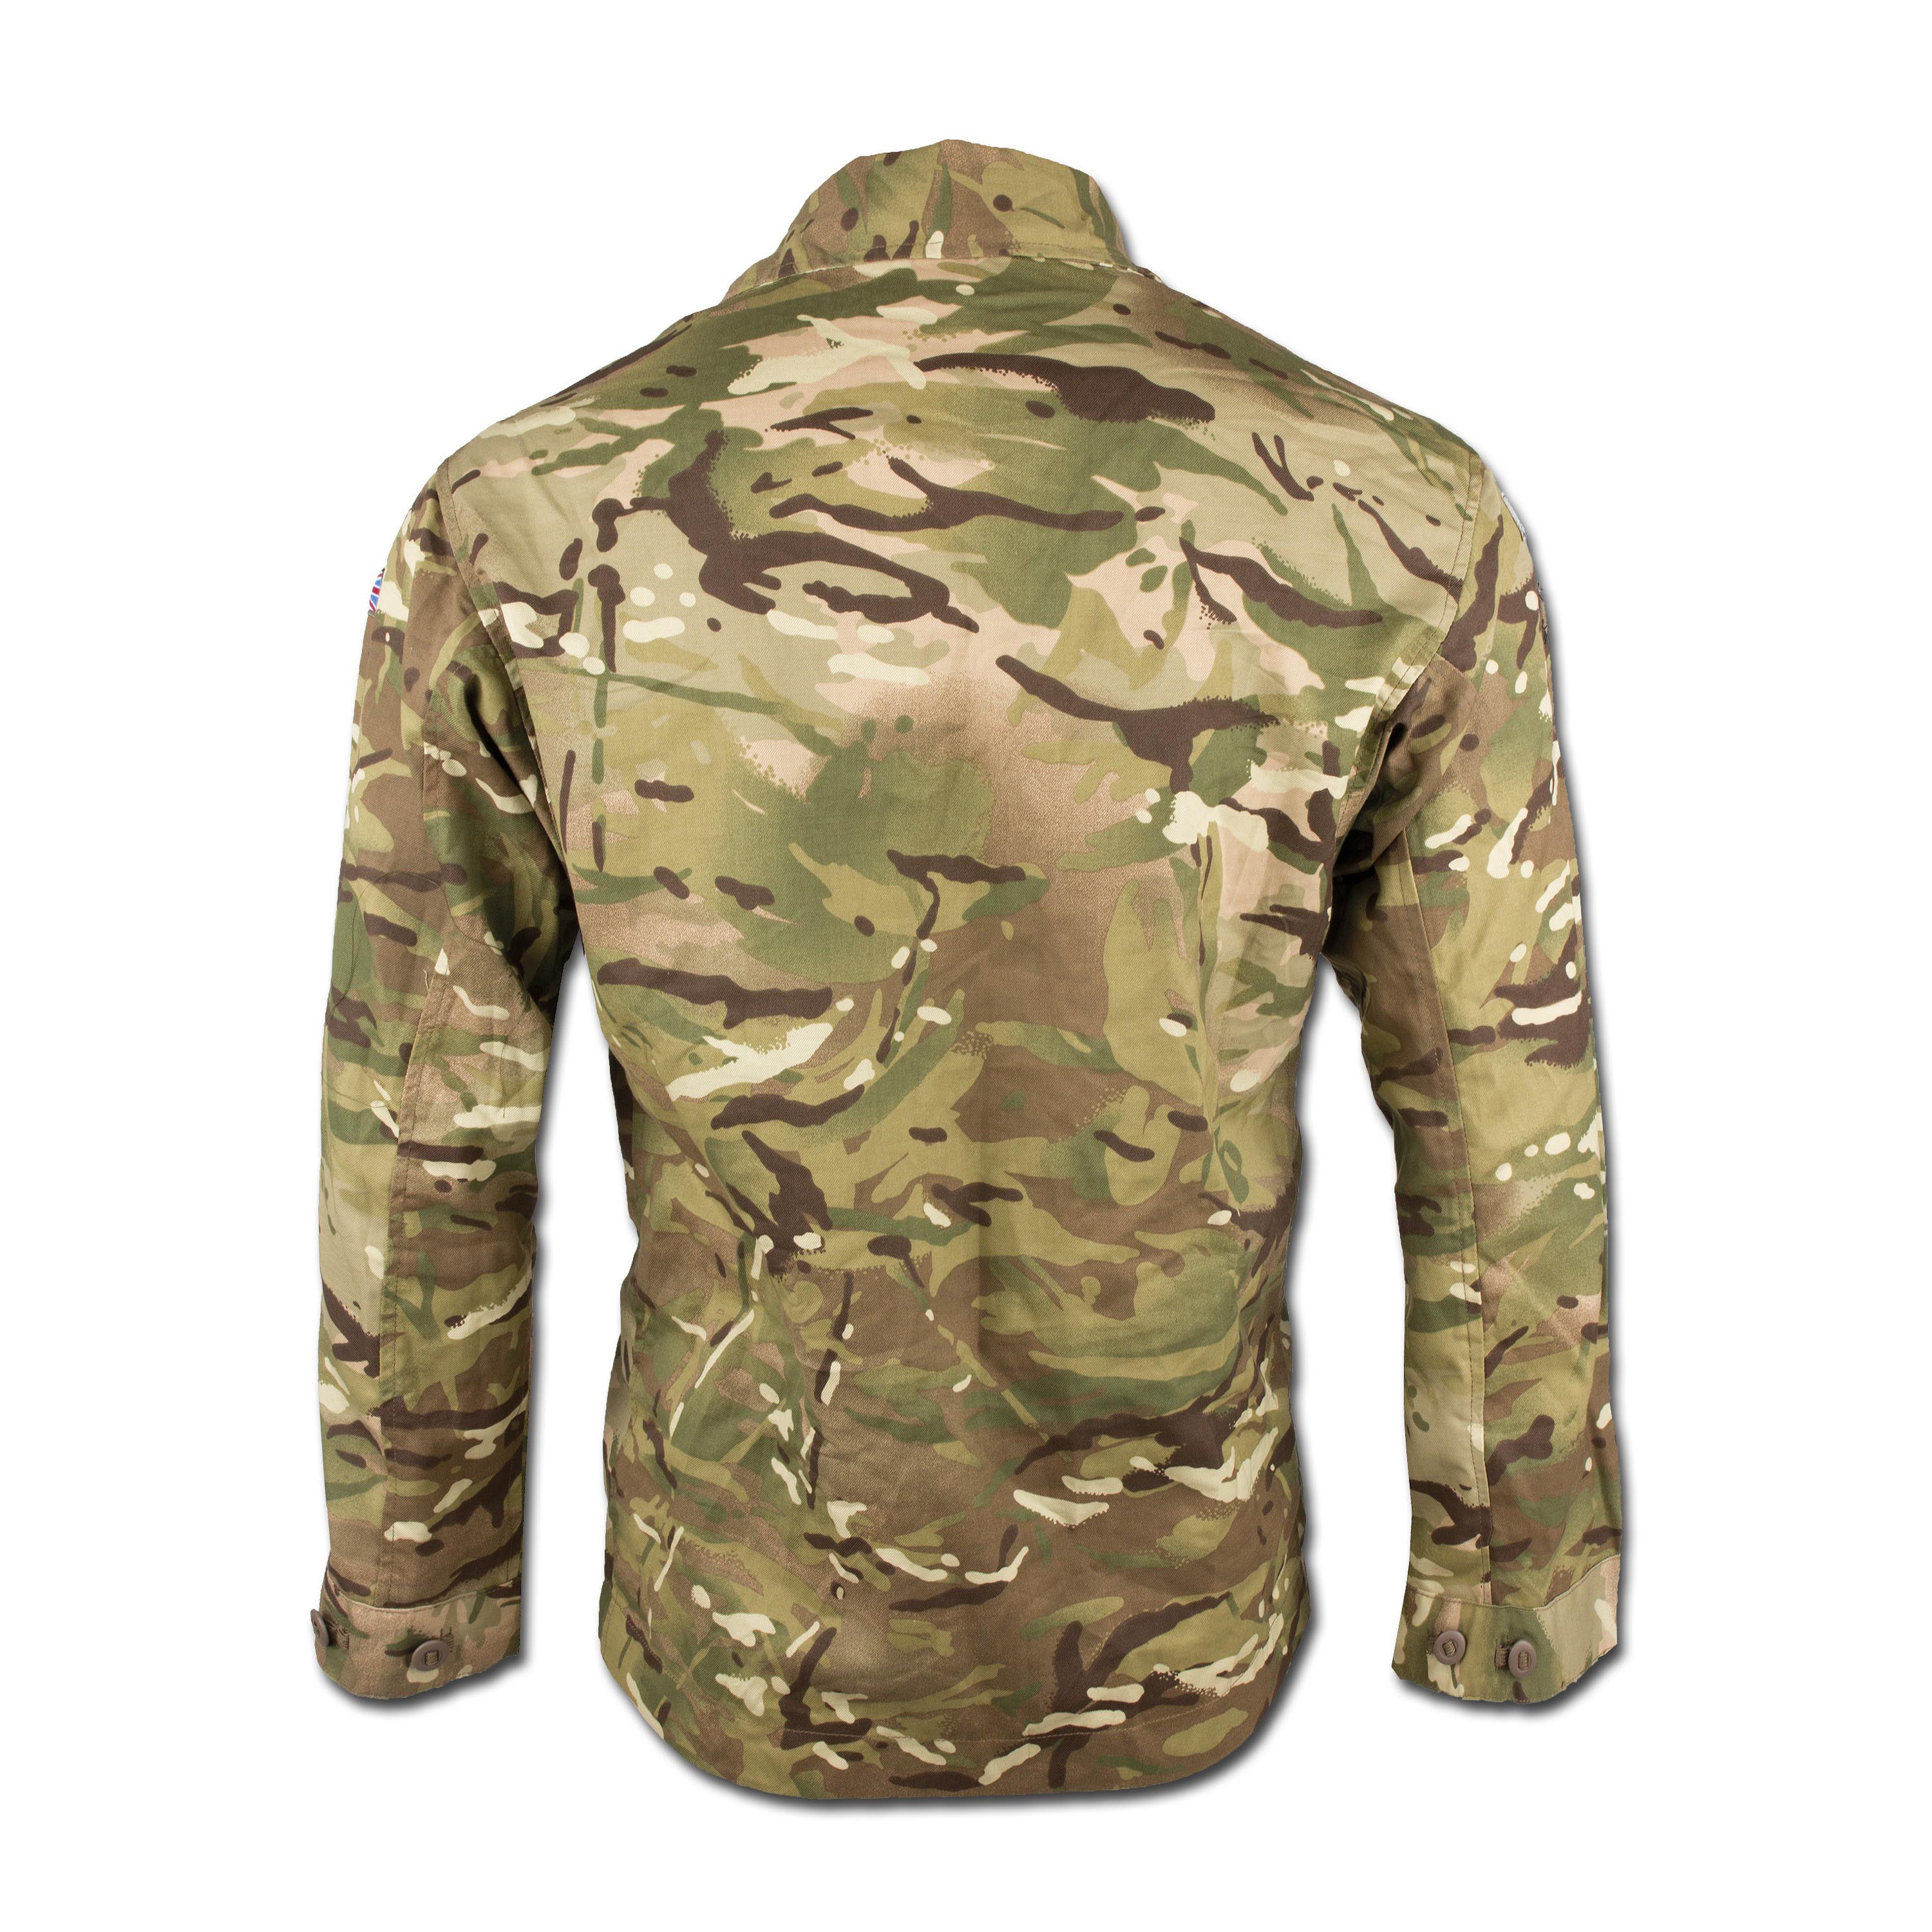 Purchase the Britische Combat Field Blouse Tropical MTP camo use